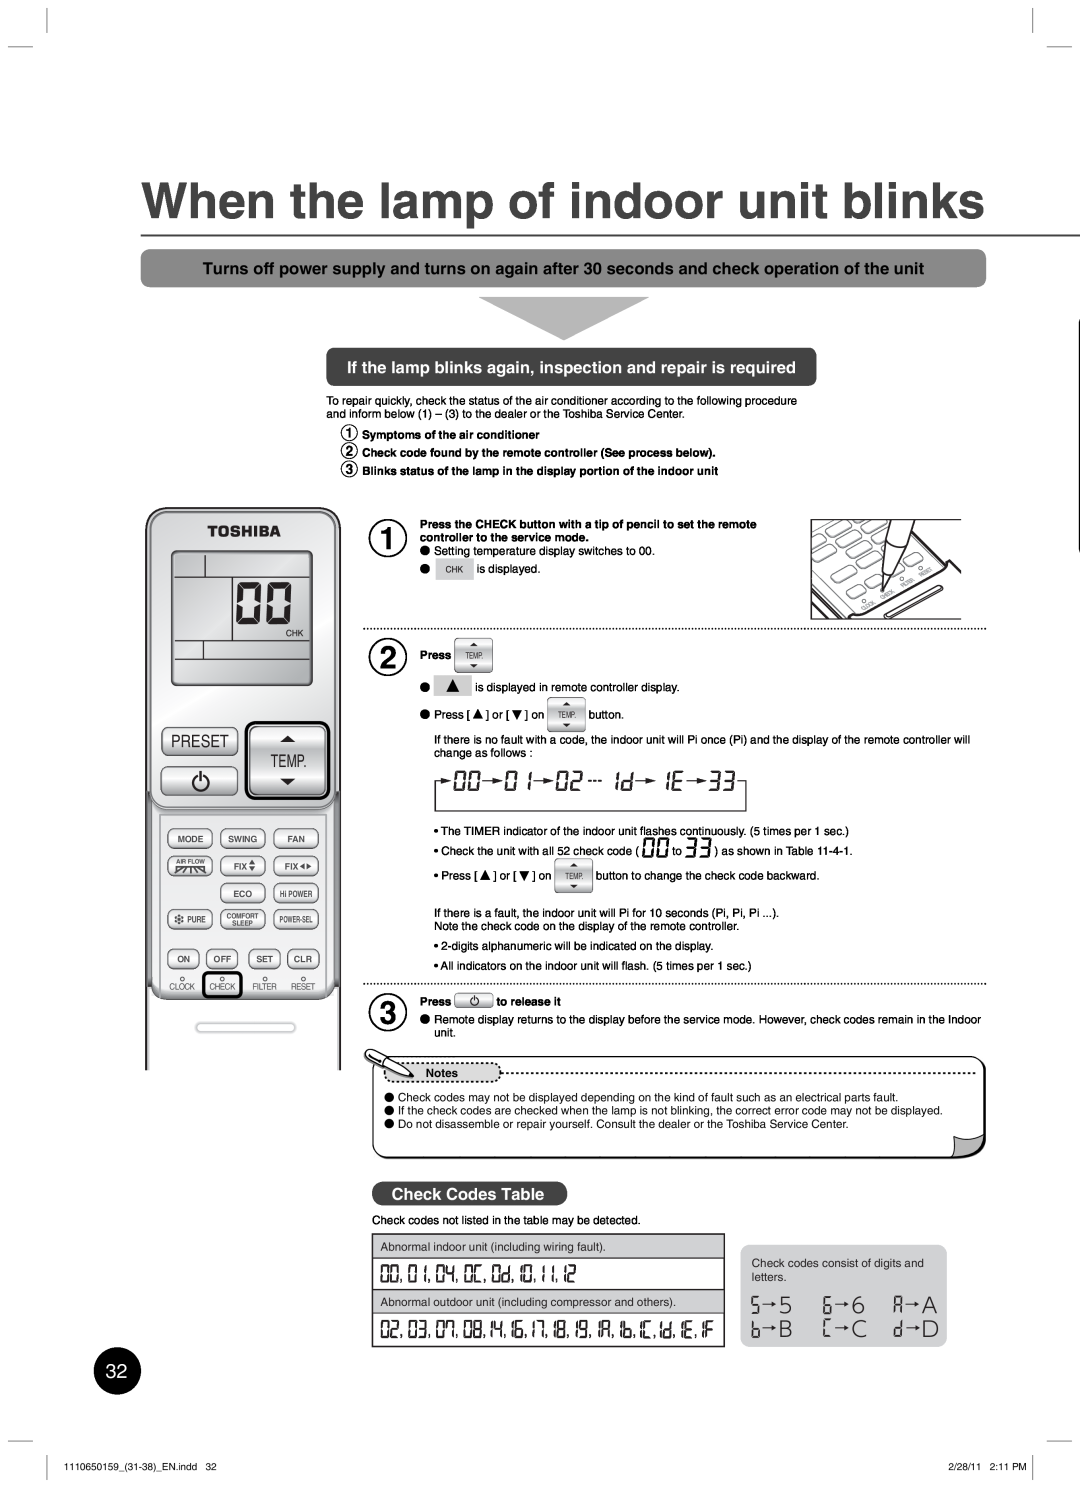 Toshiba RAS-10JKCVP owner manual When the lamp of indoor unit blinks, Check Codes Table, Preset Temp, Press TEMP 